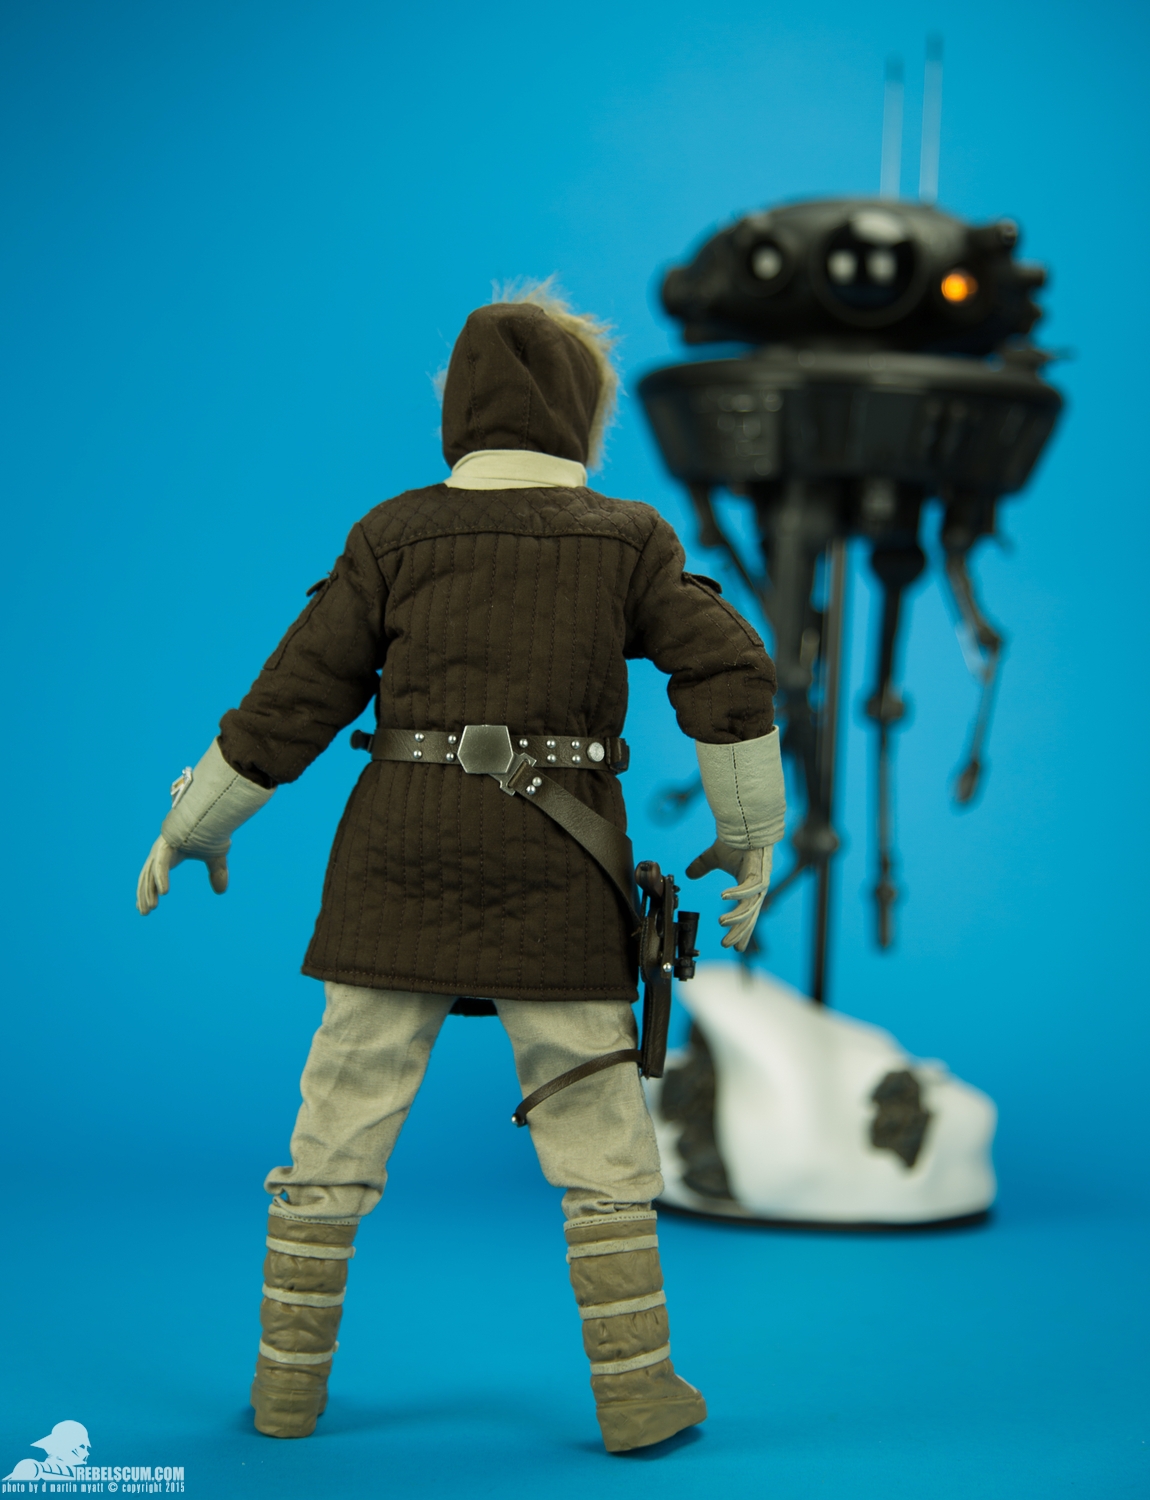 Han-Solo-Hoth-Brown-Sixth-Scale-Sideshow-Collectibles-Star-Wars-027.jpg